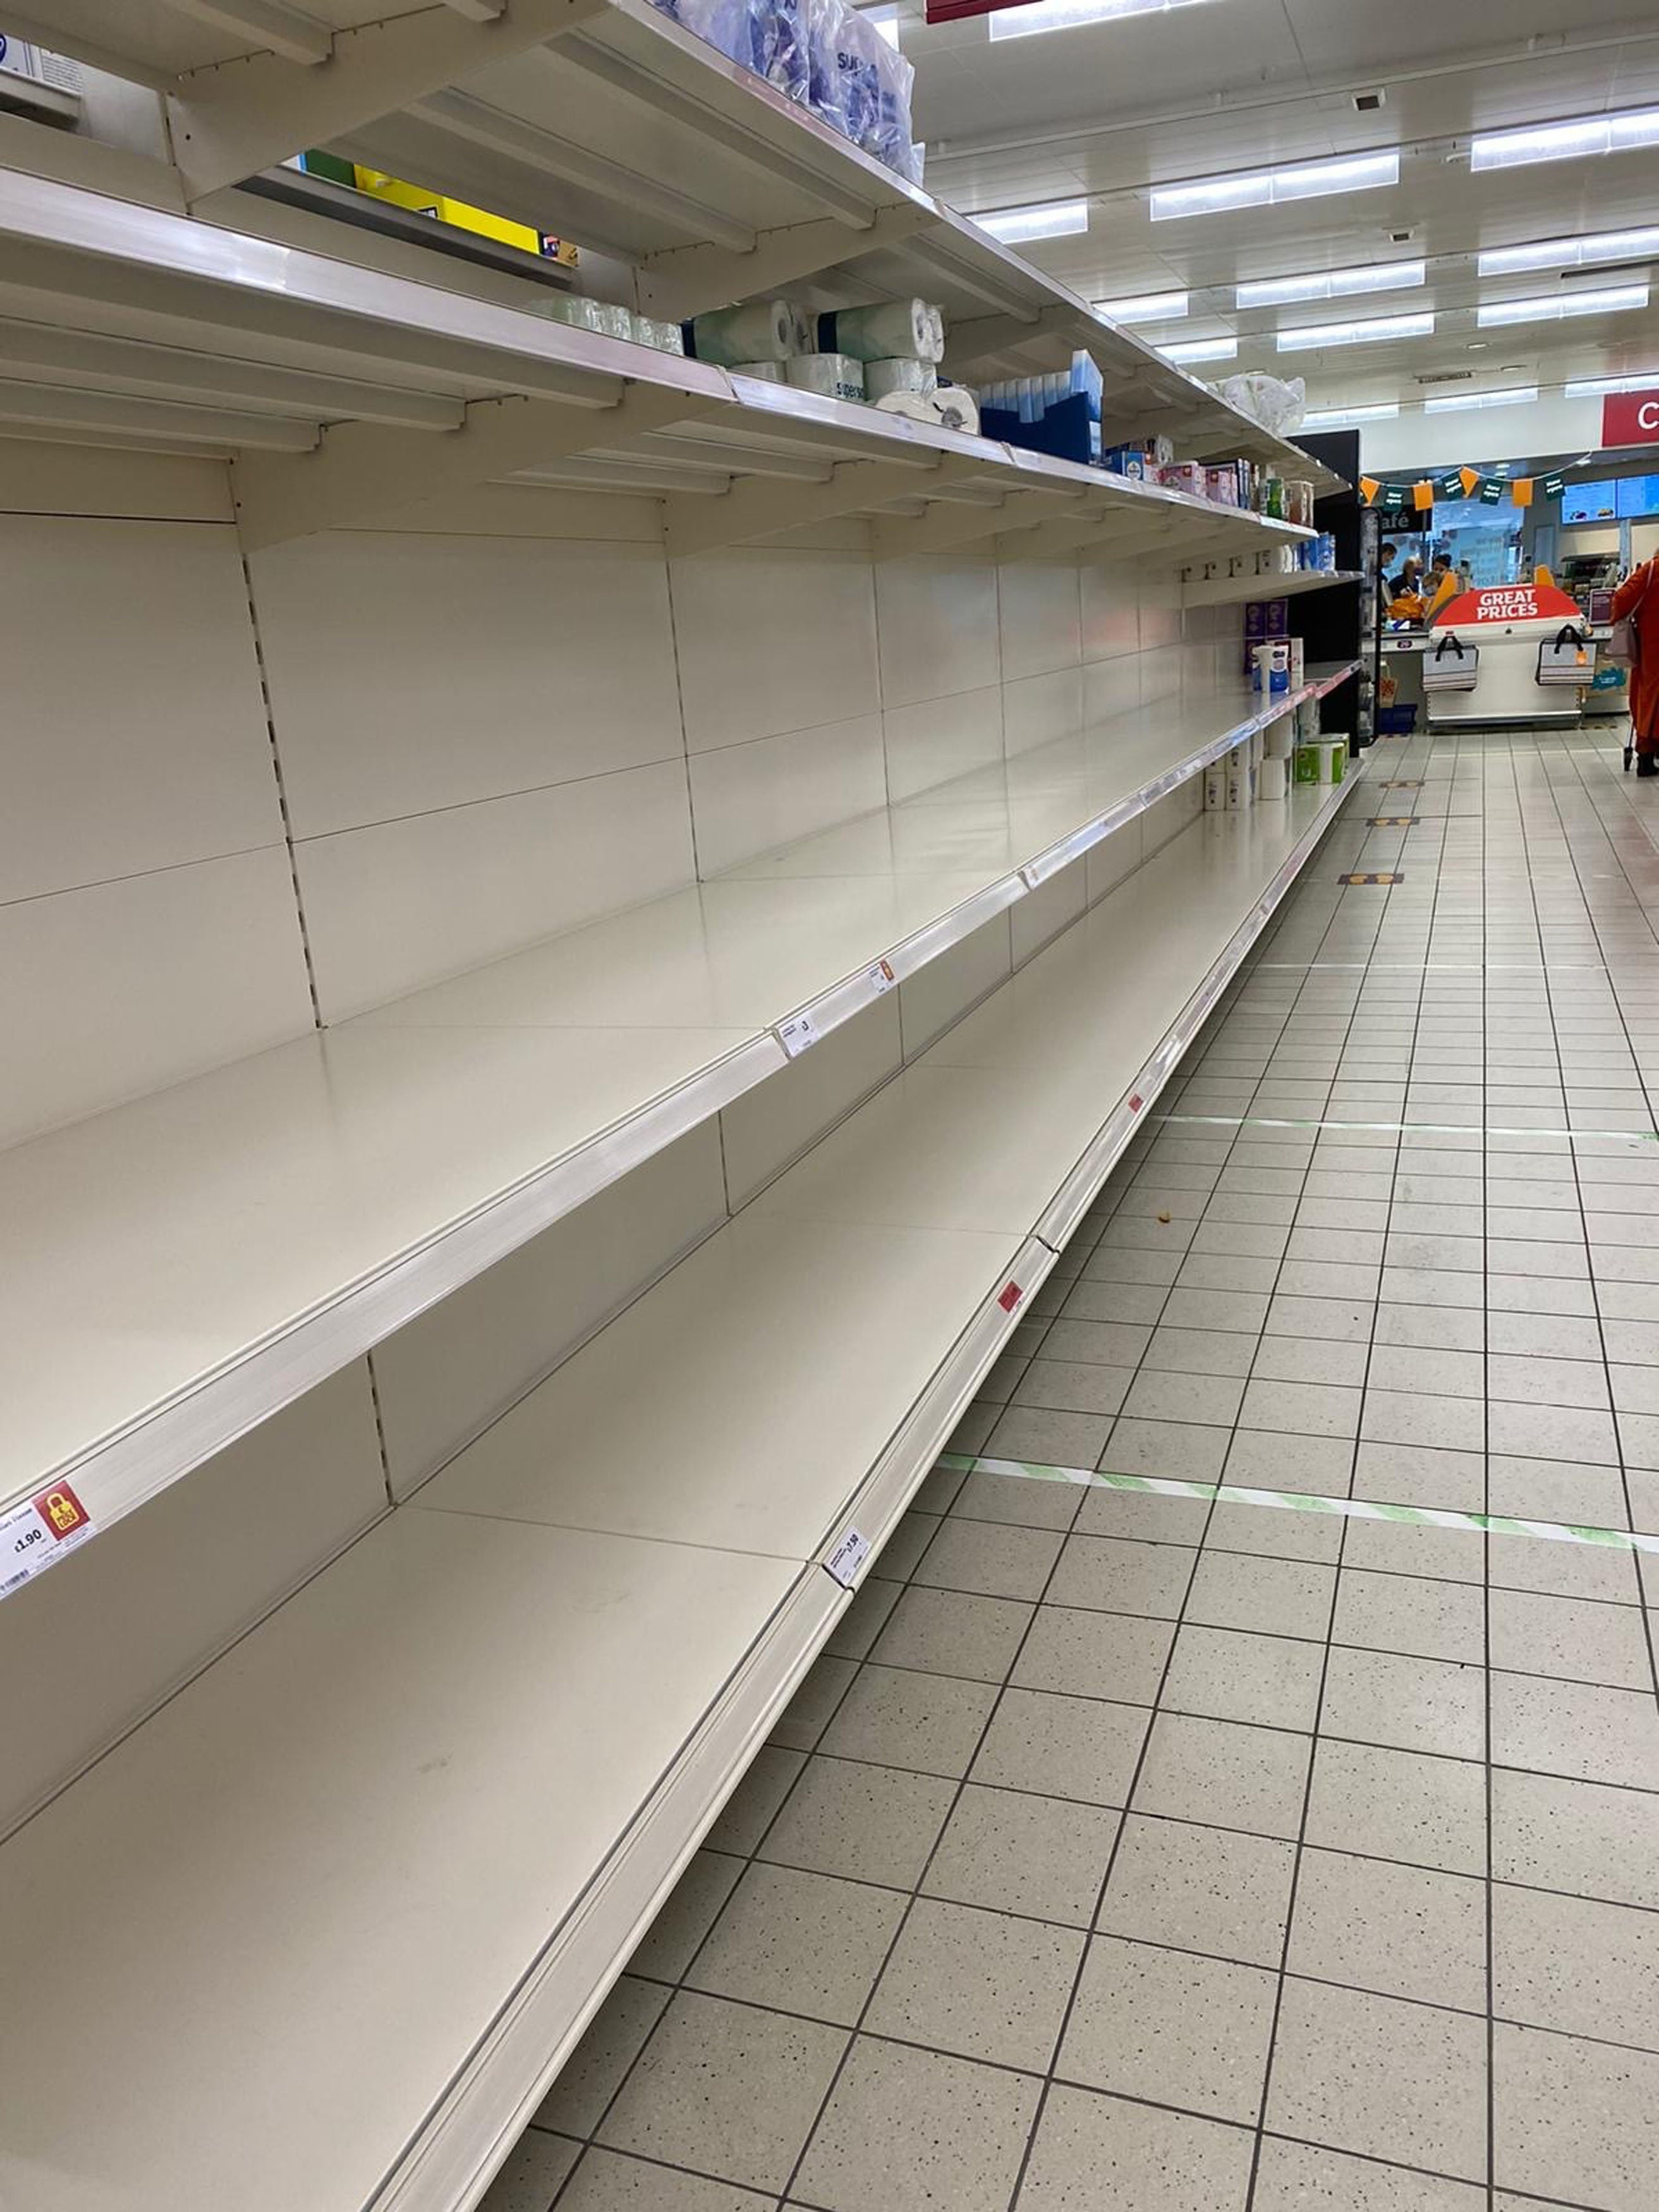 A view of the toilet roll aisle at Sainsbury’s in Weston-super-Mare, after Prime Minister Boris Johnson announced a new national lockdown will come into force in England on Thursday.